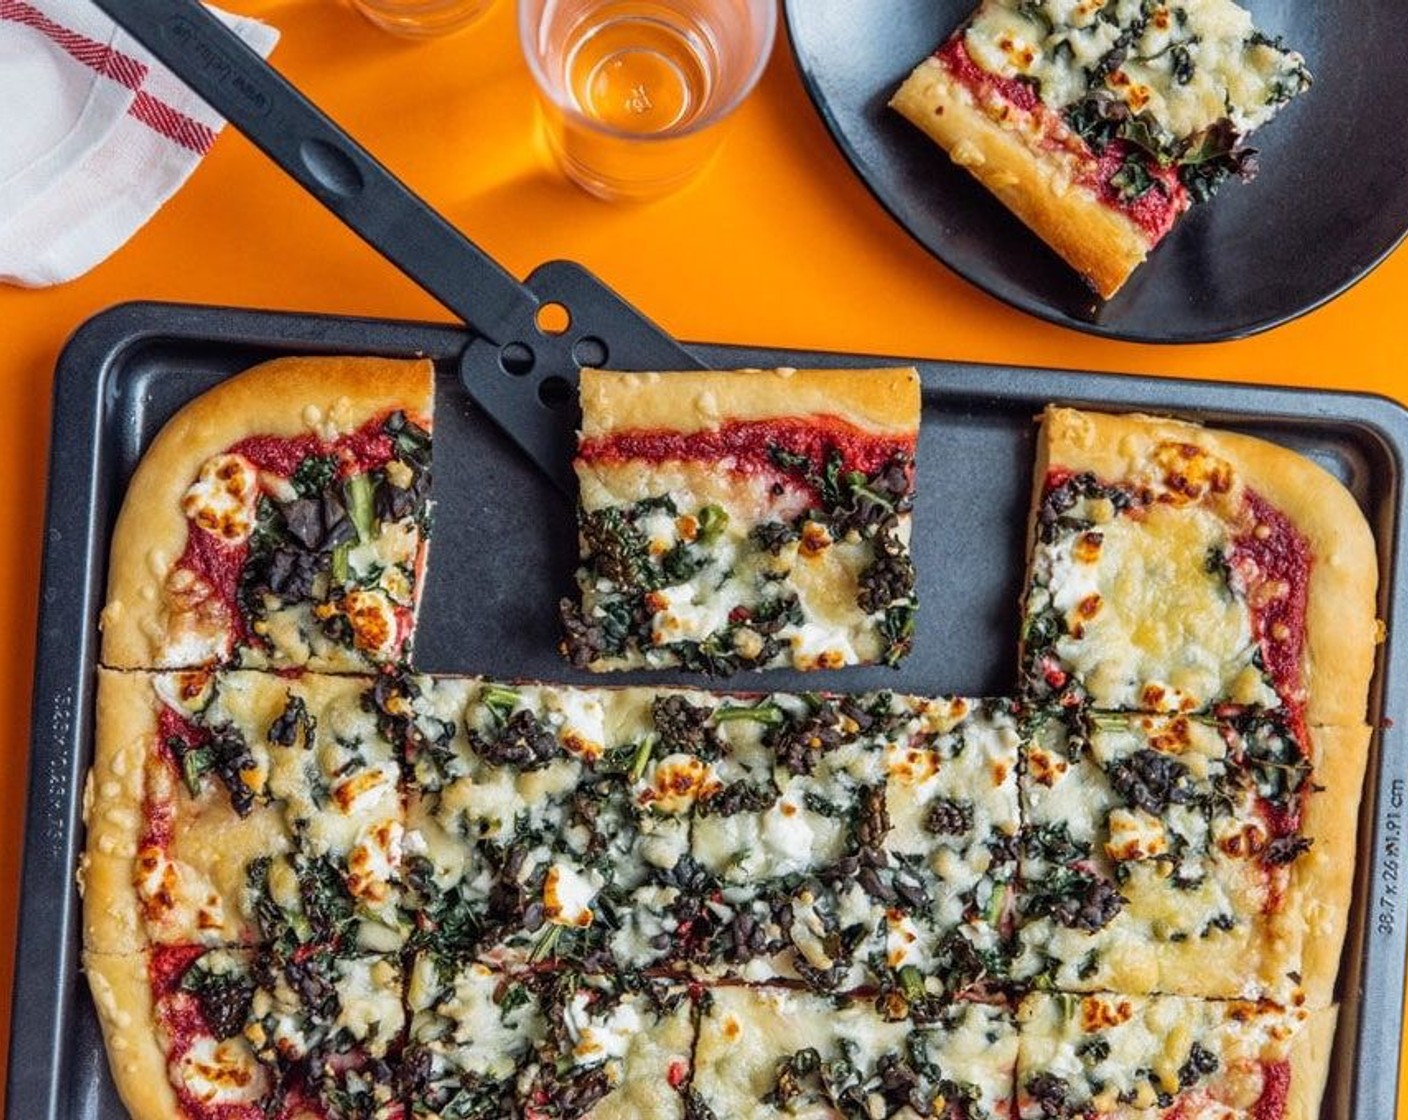 Beet Pesto Pizza with Goat Cheese and Kale